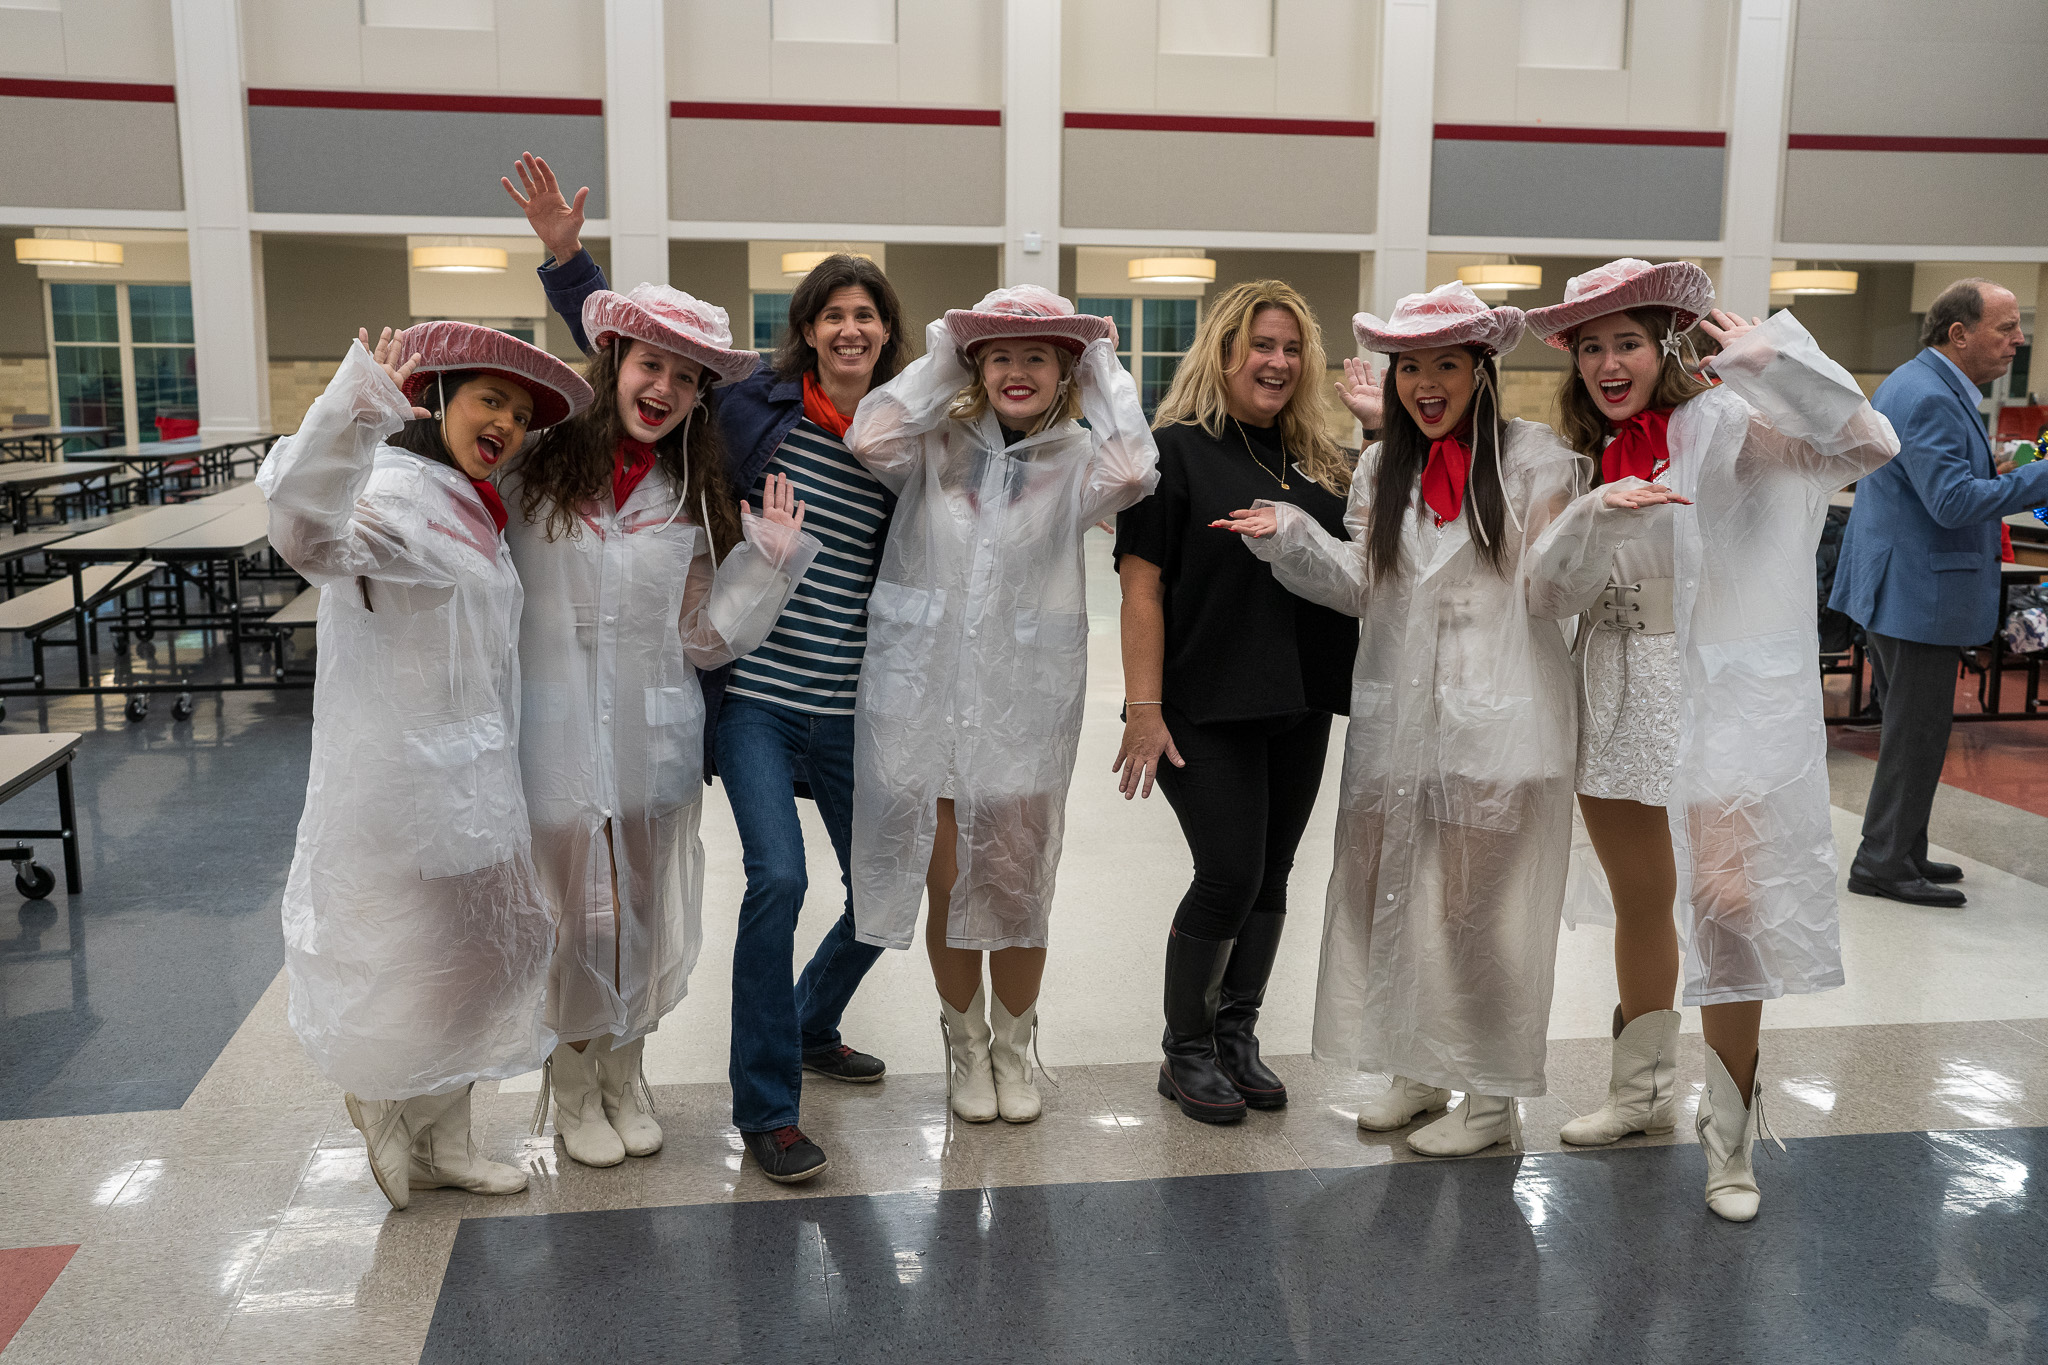 group of women in rain ponchos standing in a cafeteria